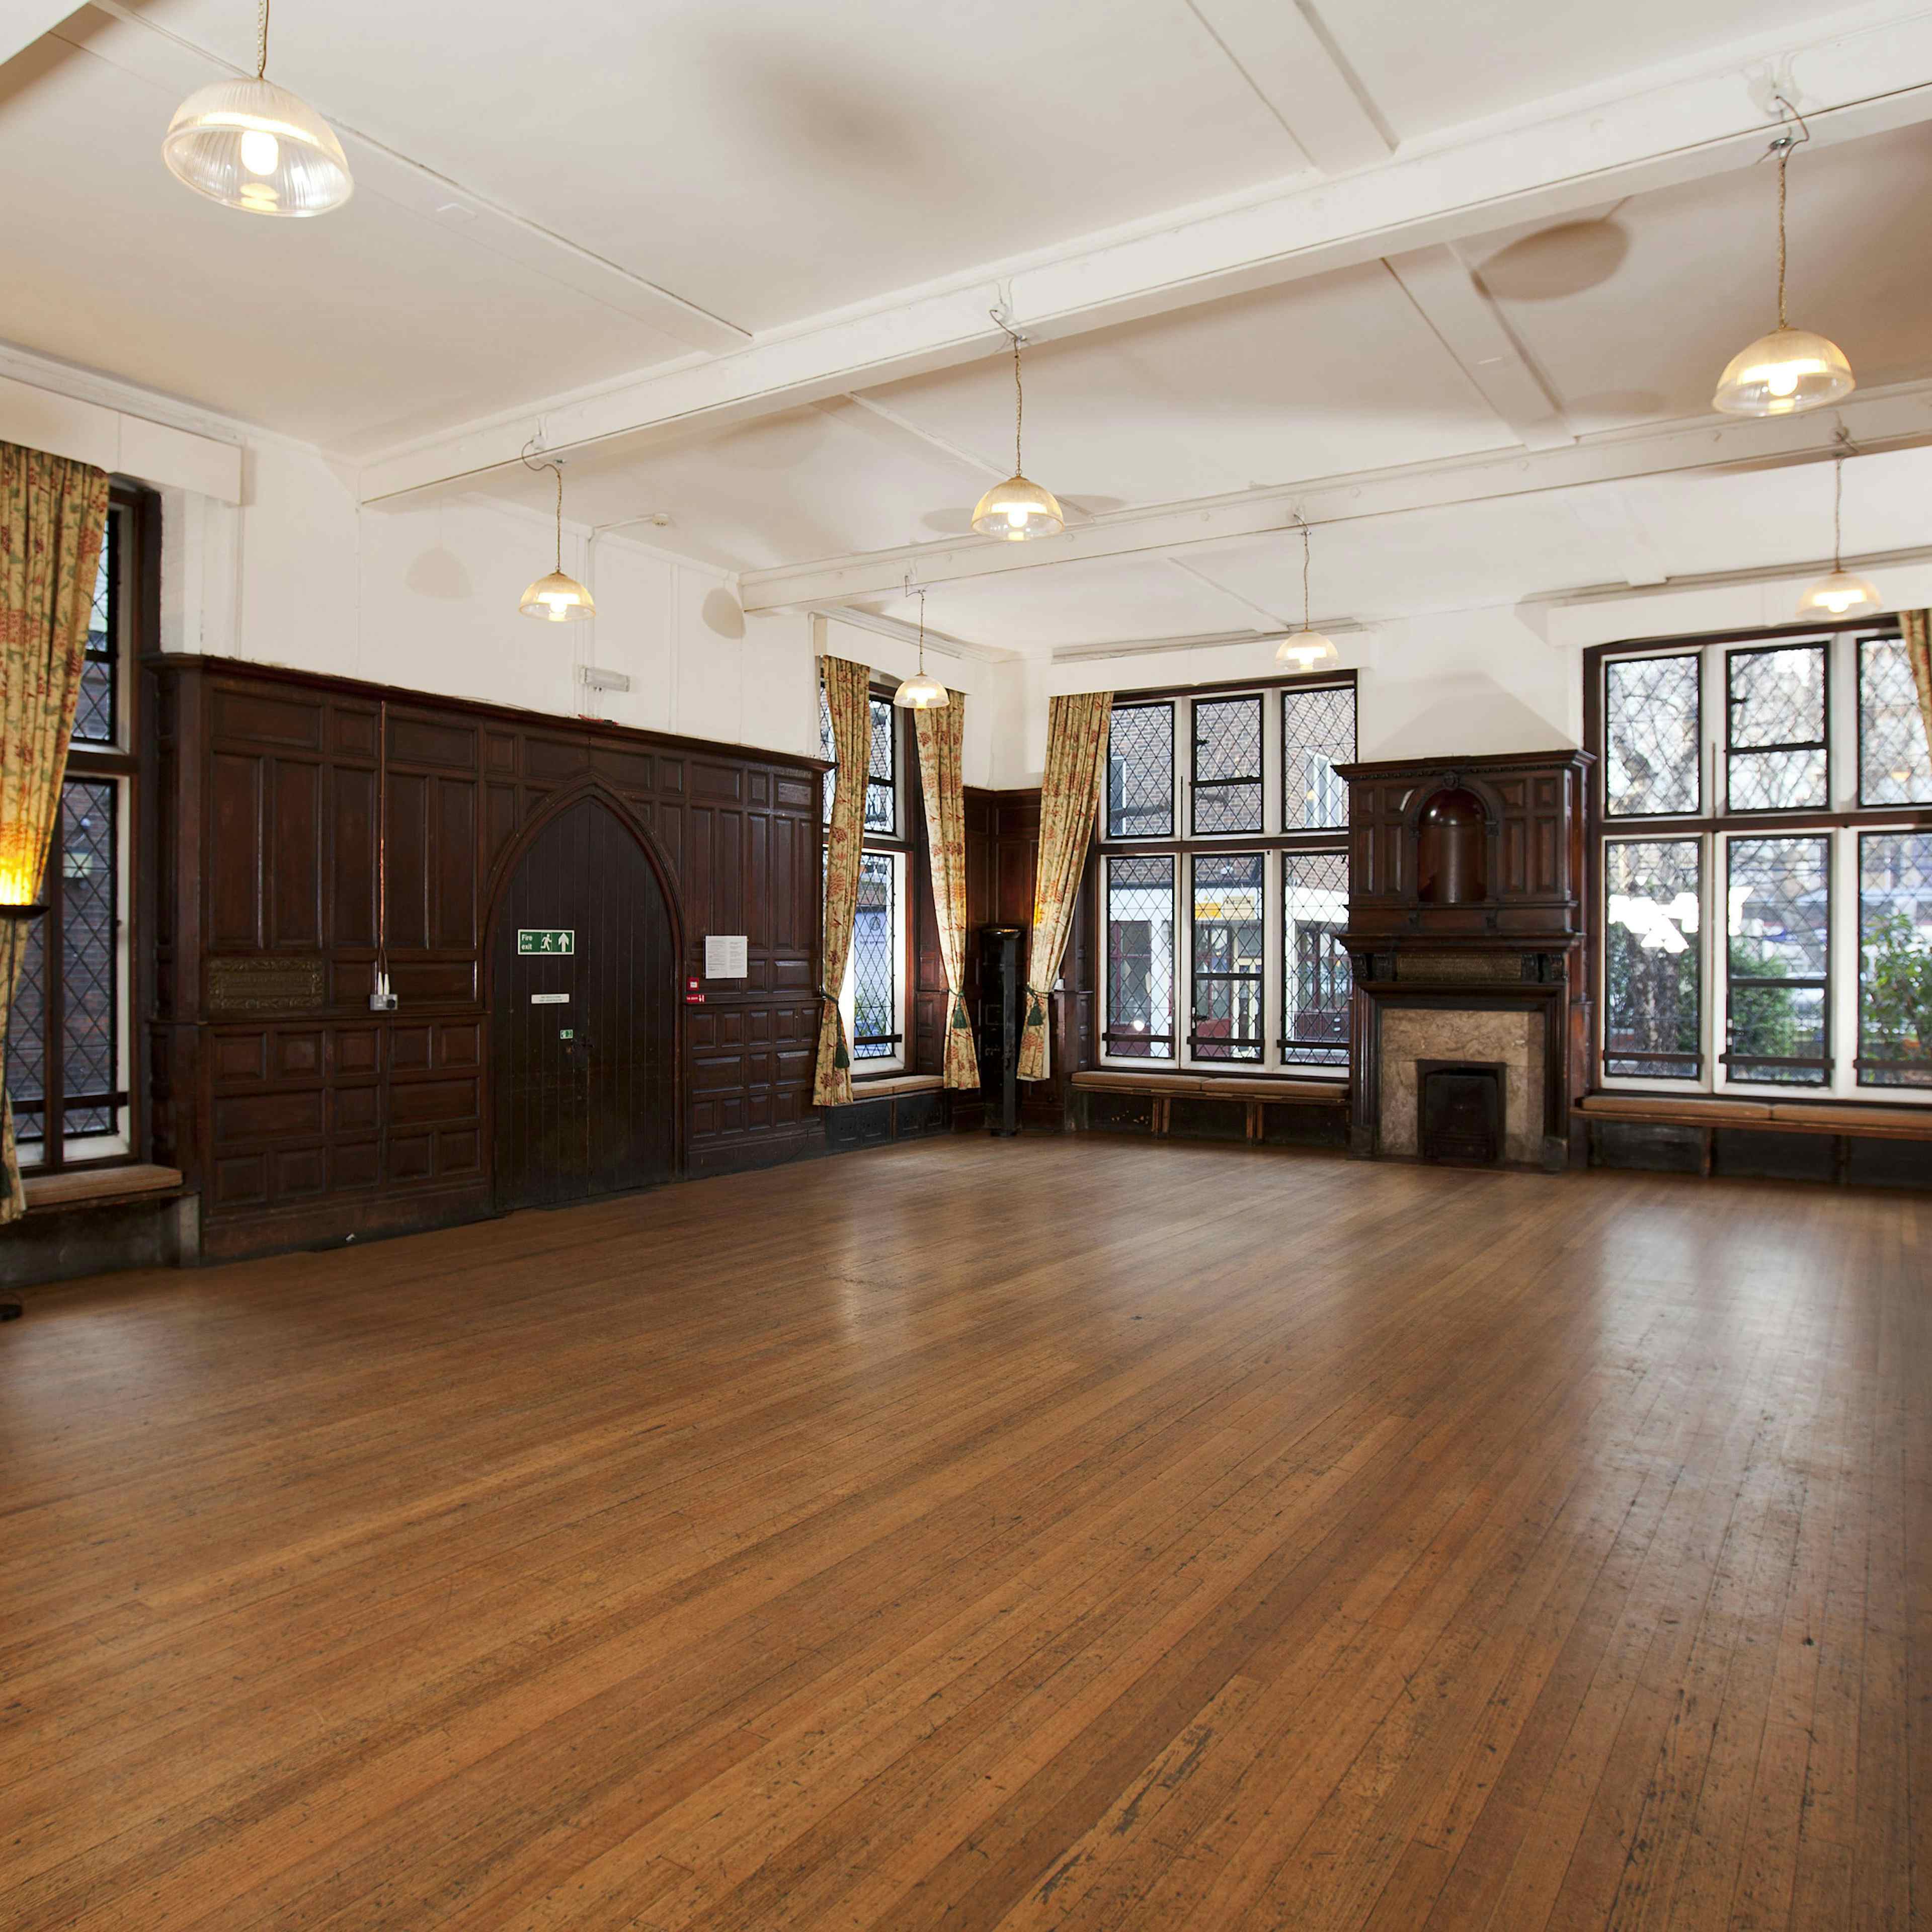 Toynbee Hall - The Lecture Hall image 3